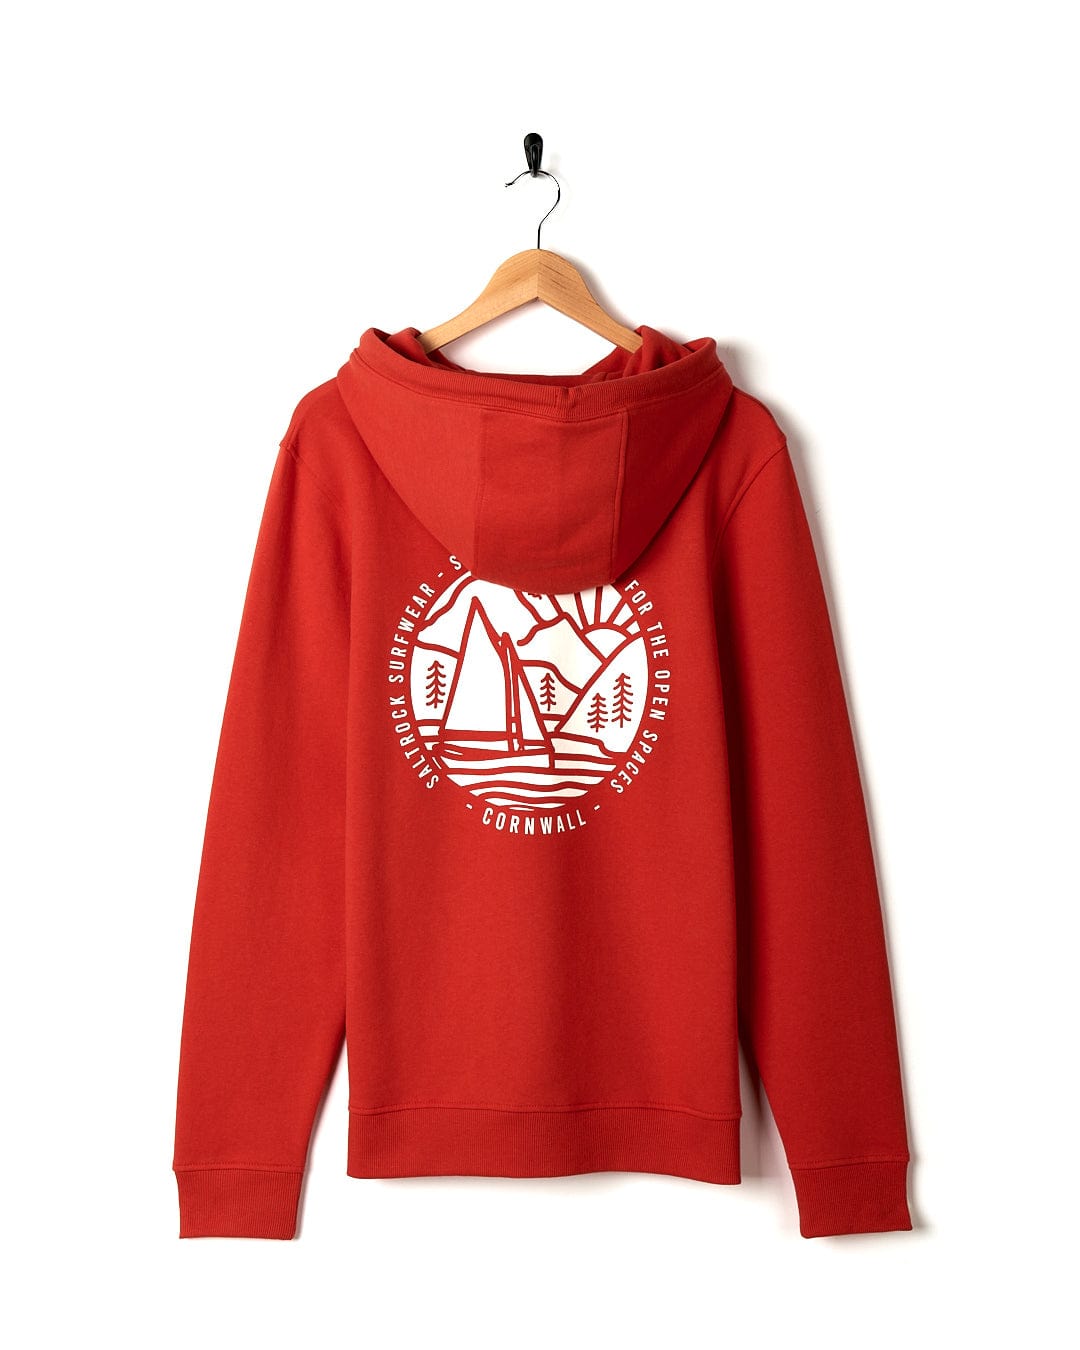 A Cornwall Sailaway - Mens Pop Hoodie - Red with a Saltrock logo on it.